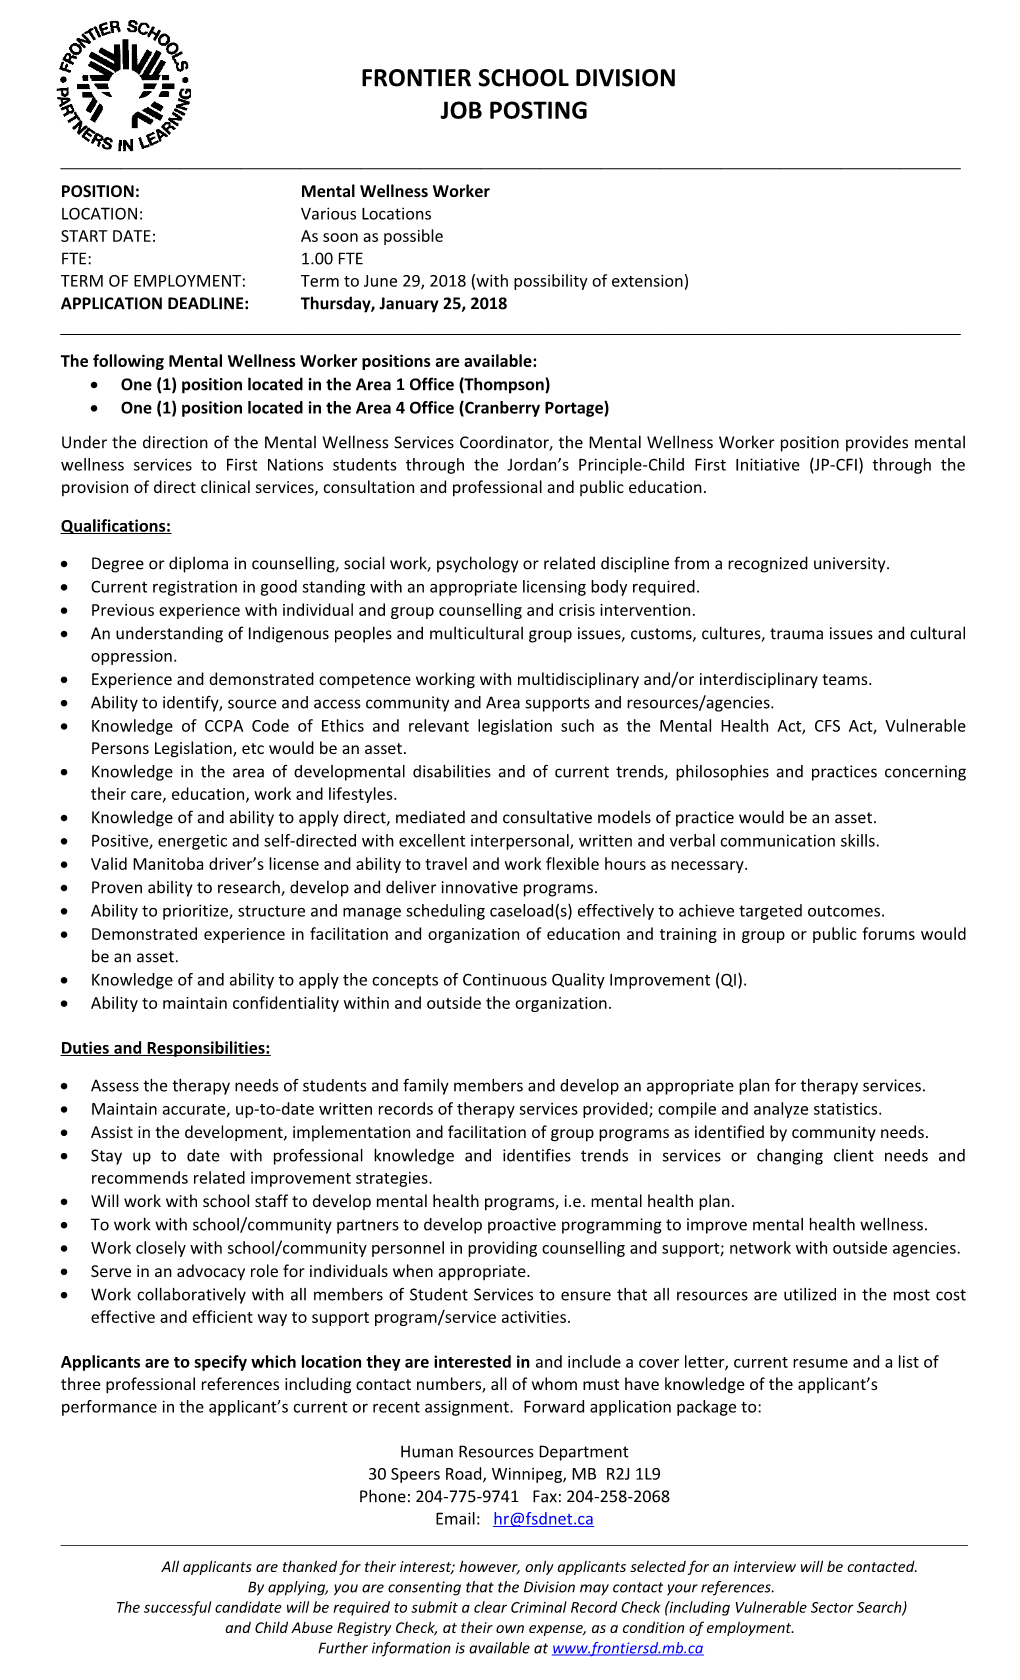 Frontier School Division - Mental Wellness Workers - Closing Date January 25, 2018